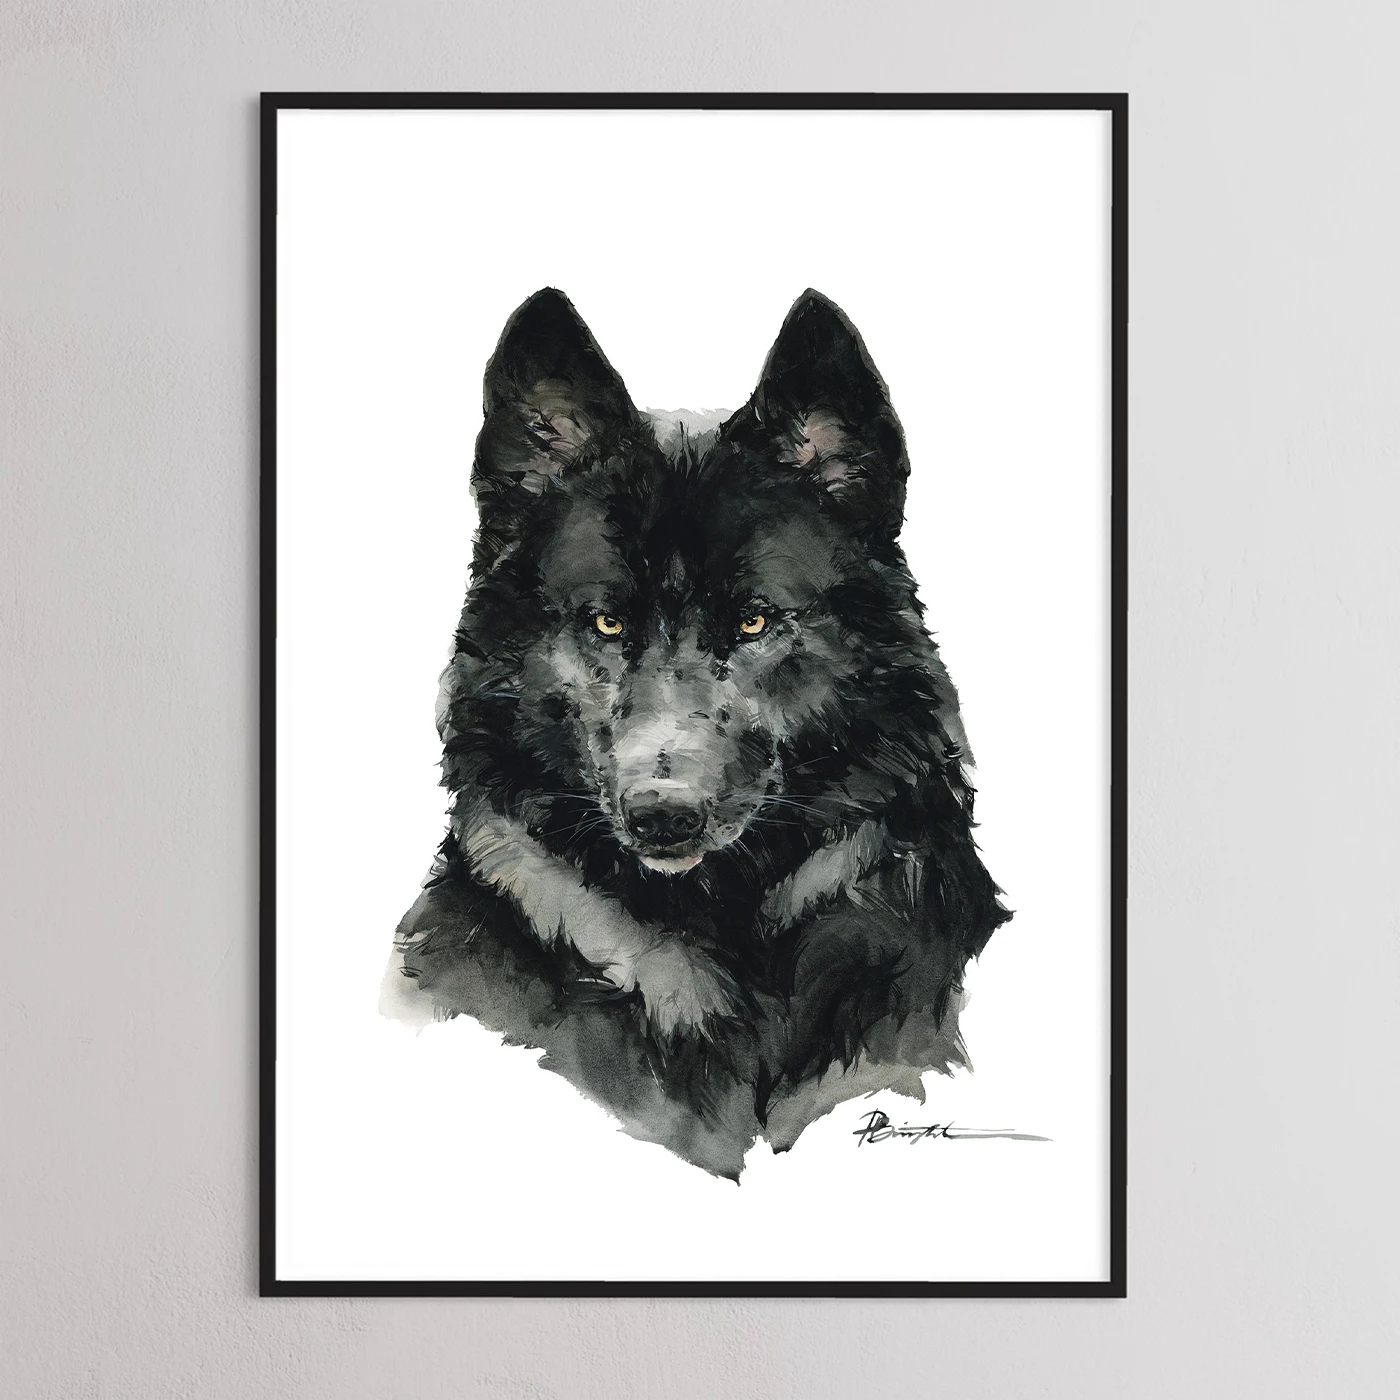 Black timber wolf print by Polina Bright